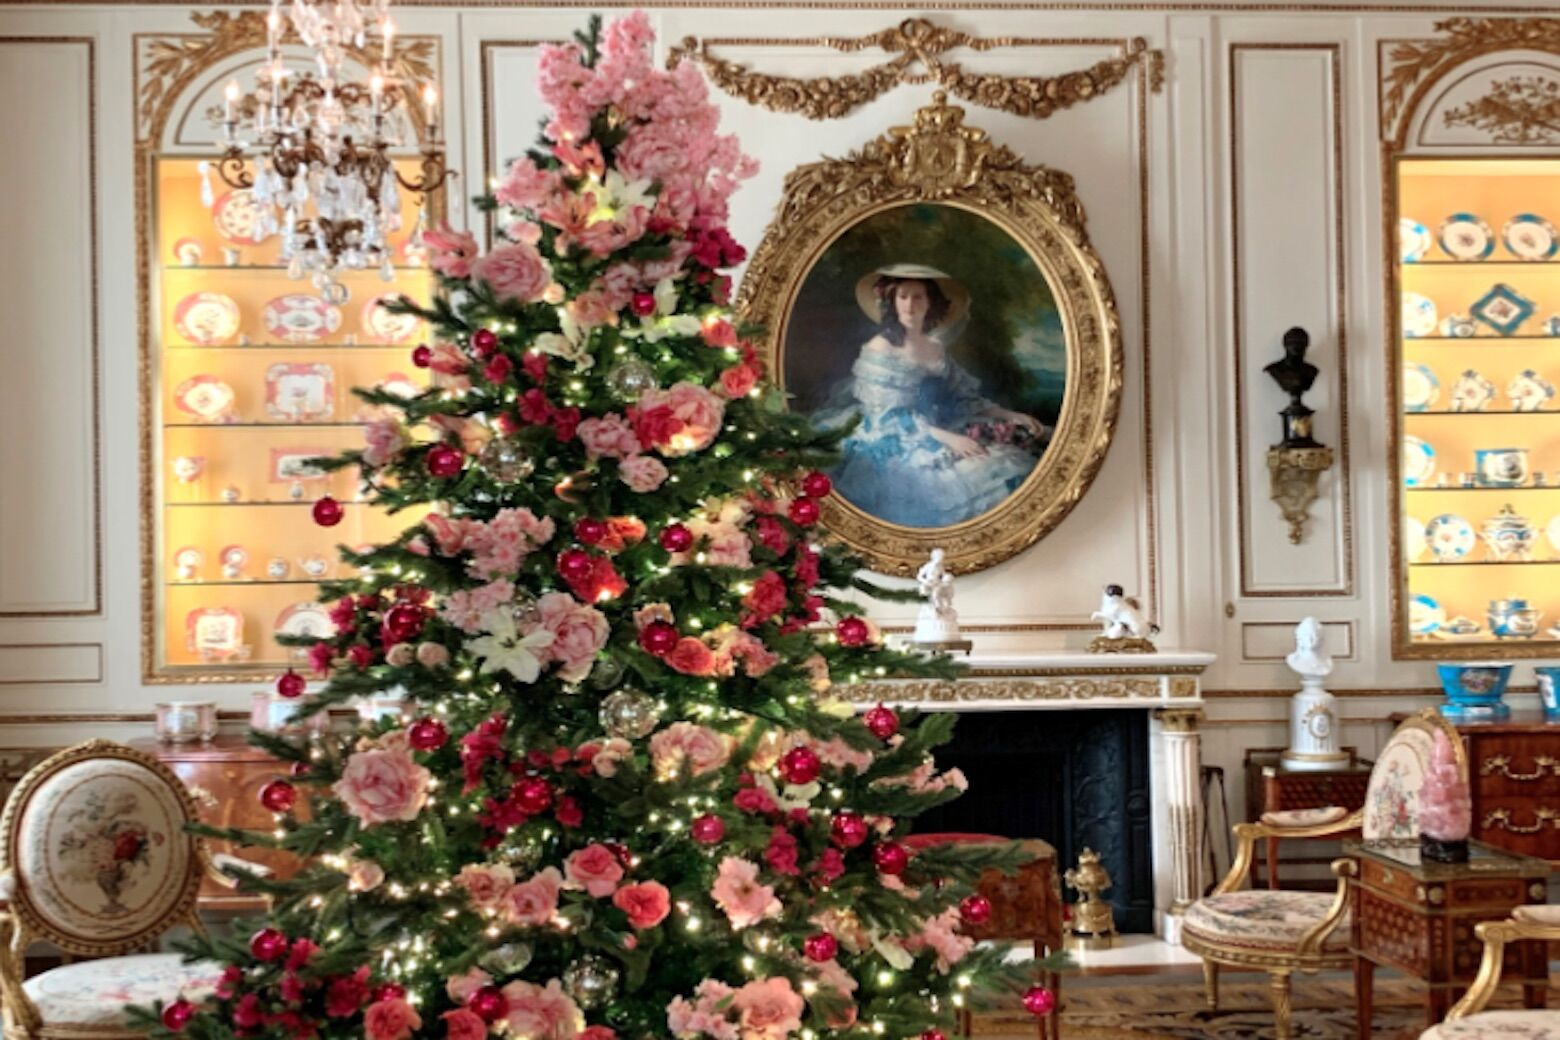 <p><strong>Season&#8217;s Greeting at Hillwood Estate</strong></p>
<p><em>4155 Linnean Ave. NW; Washington, D.C.</em></p>
<p>Check out the <a href="https://www.hillwoodmuseum.org/SeasonsGreetings" target="_blank" rel="noopener noreferrer">&#8220;Season’s Greetings&#8221;</a> festivities at the historic <a href="https://www.hillwoodmuseum.org/" target="_blank" rel="noopener noreferrer">Hillwood Estate, Museum &amp; Gardens</a> through Jan. 10.</p>
<p>The mansion and the grounds are open, and Christmas trees inspired by a particular season are on display.</p>
<p><a href="https://www.hillwoodmuseum.org/visit/plan-your-visit" target="_blank" rel="noopener">Make a reservation in advance</a> to visit the estate. Suggested donations $18/$15/$10/$5. Free to children under 6 and Hillwood members. Hillwood is open from 10 a.m. to 5 p.m. Tuesday to Sunday.</p>
<p><a href="https://wtop.com/entertainment/2020/12/hillwoods-seasons-greetings-offers-workshops-tours-of-holiday-decor/" target="_blank" rel="noopener">Find out more about holiday events at Hillwood</a>.</p>
